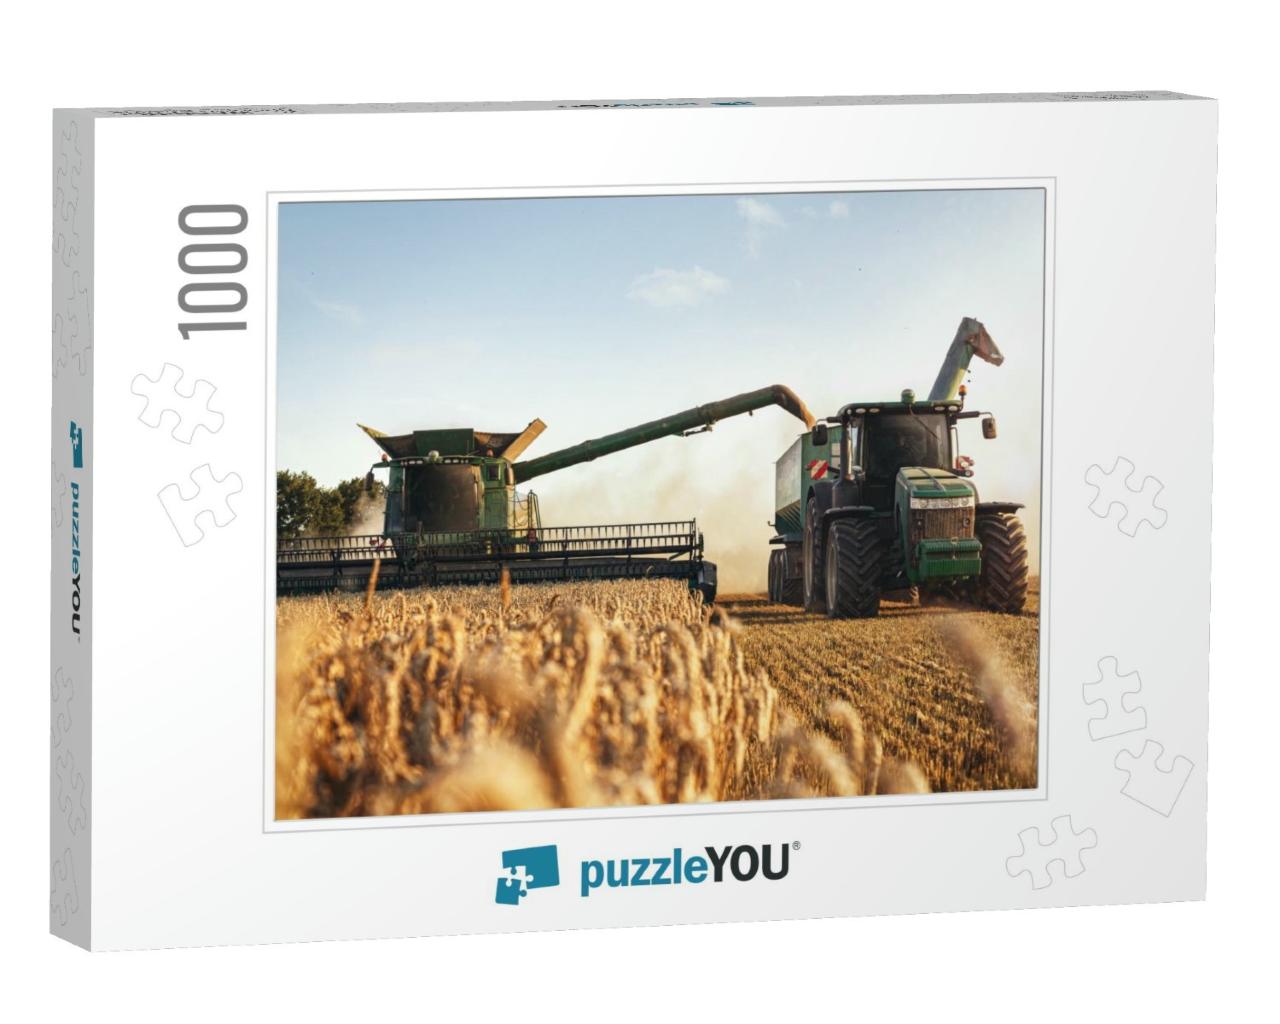 Combine Harvester & a Tractor Working on a Wheat Field... Jigsaw Puzzle with 1000 pieces